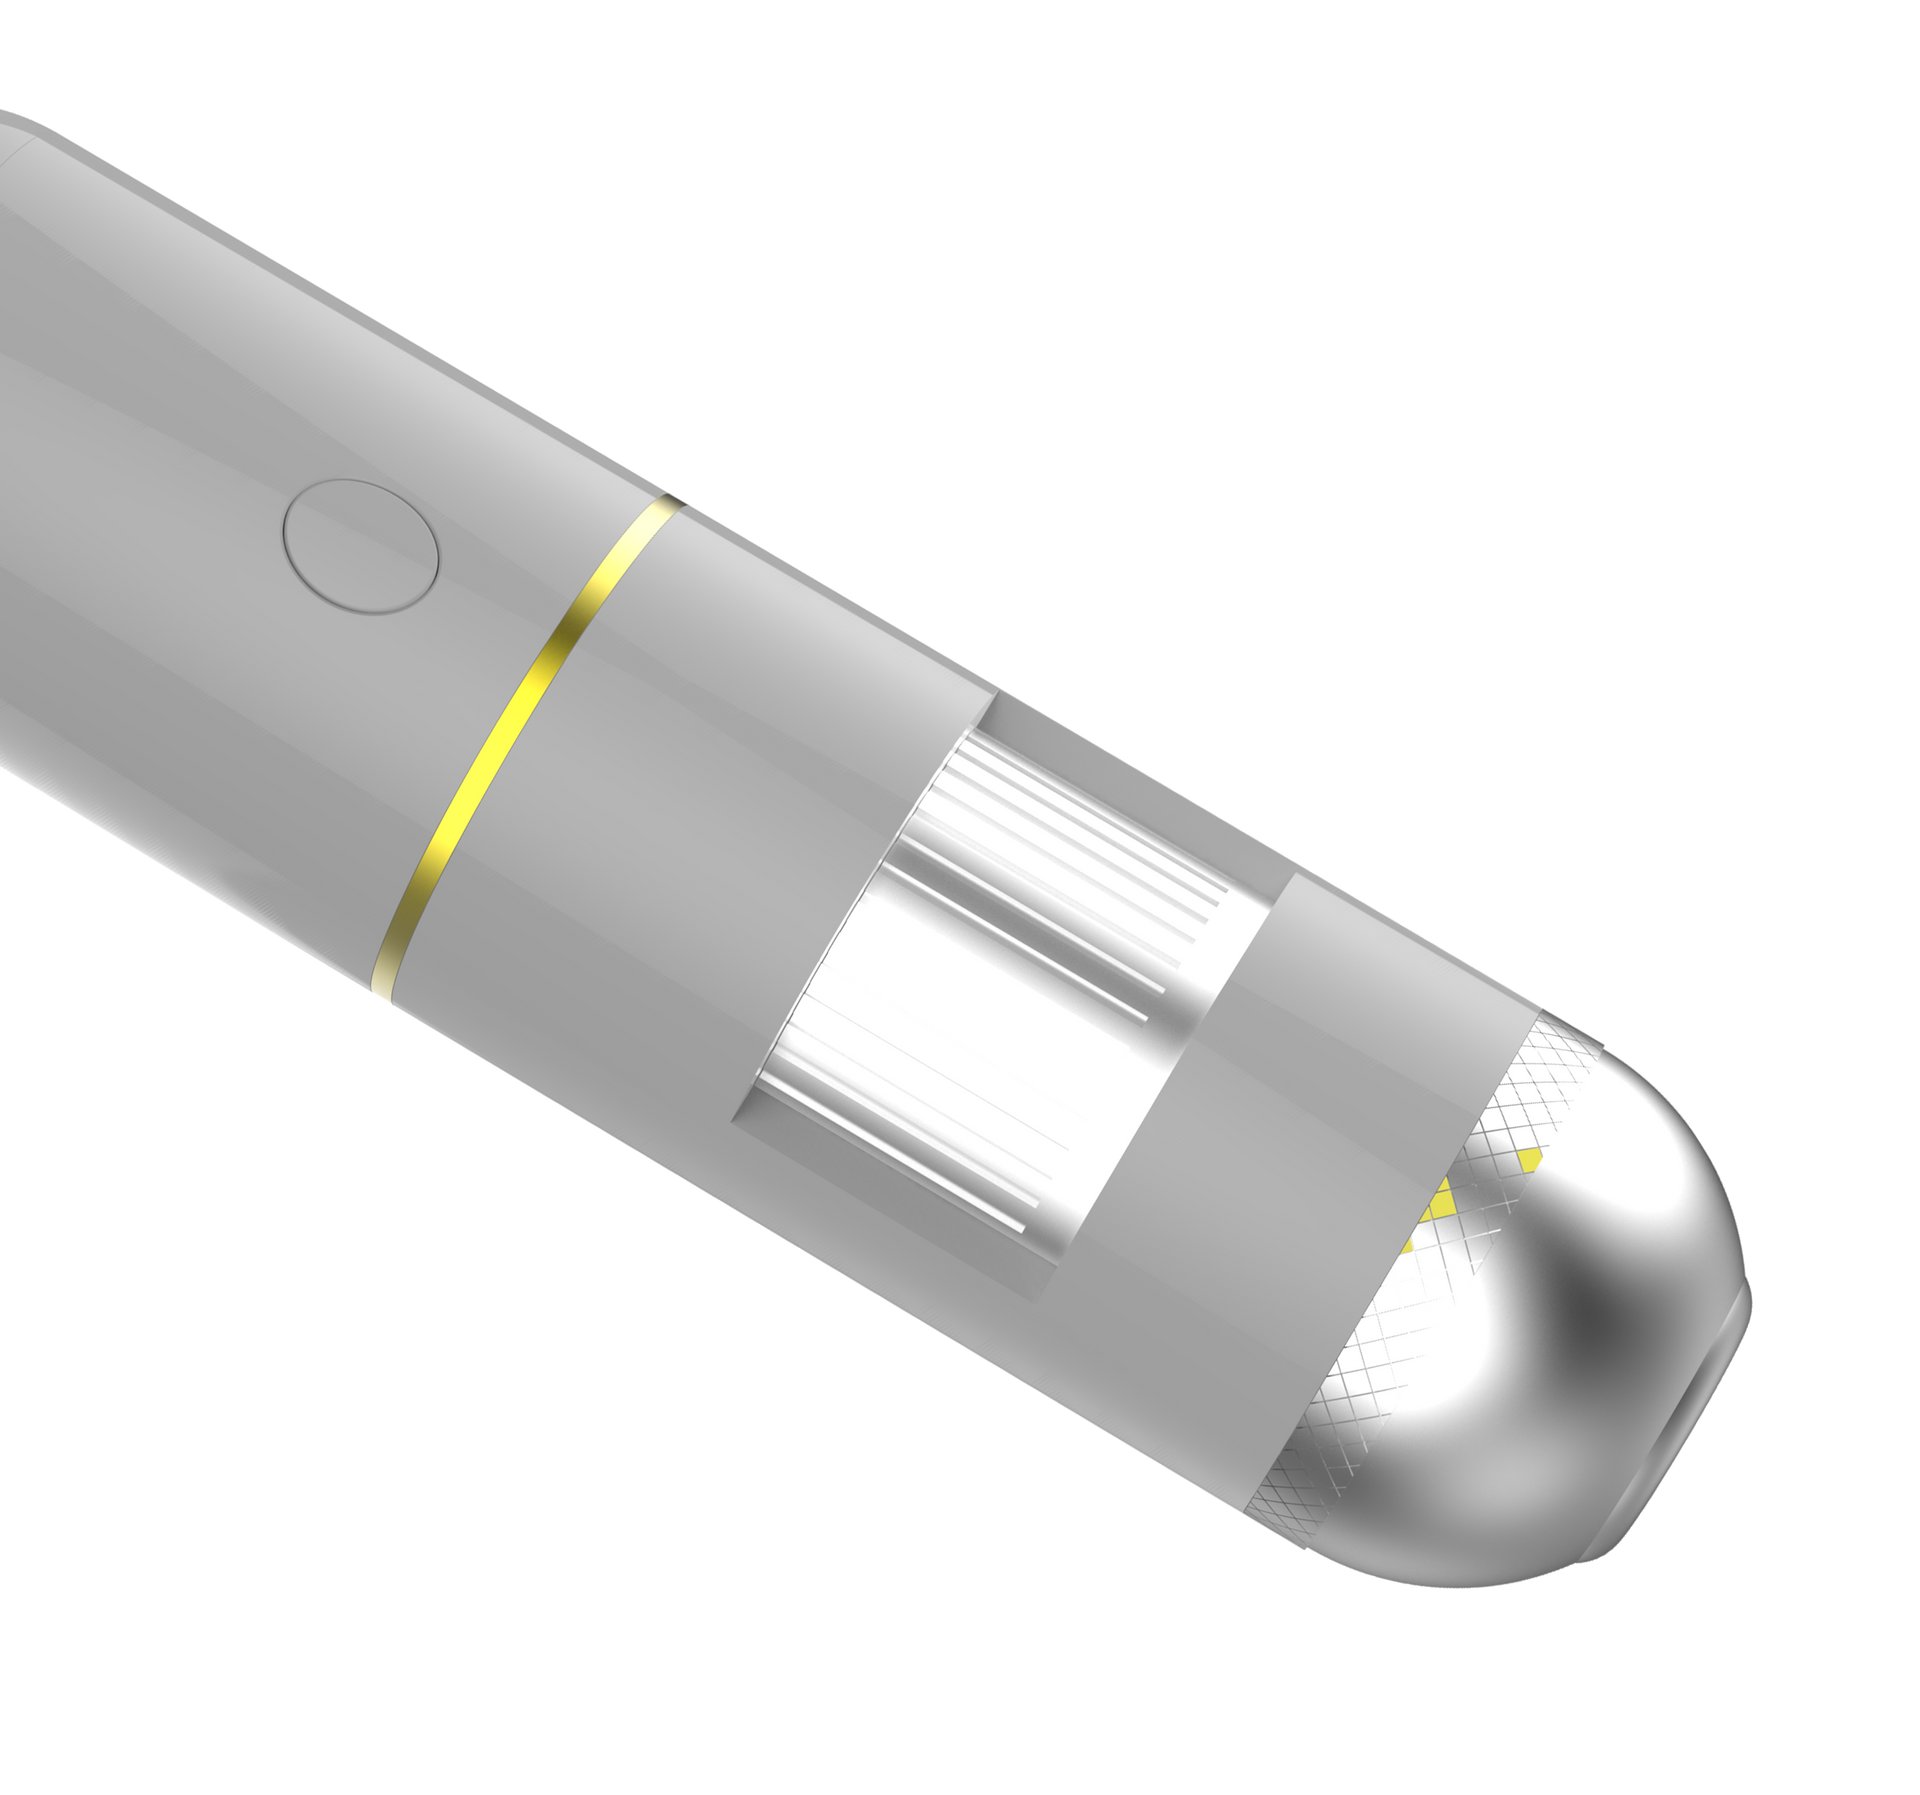 A close up of a gray object with a yellow stripe on it on a white background.